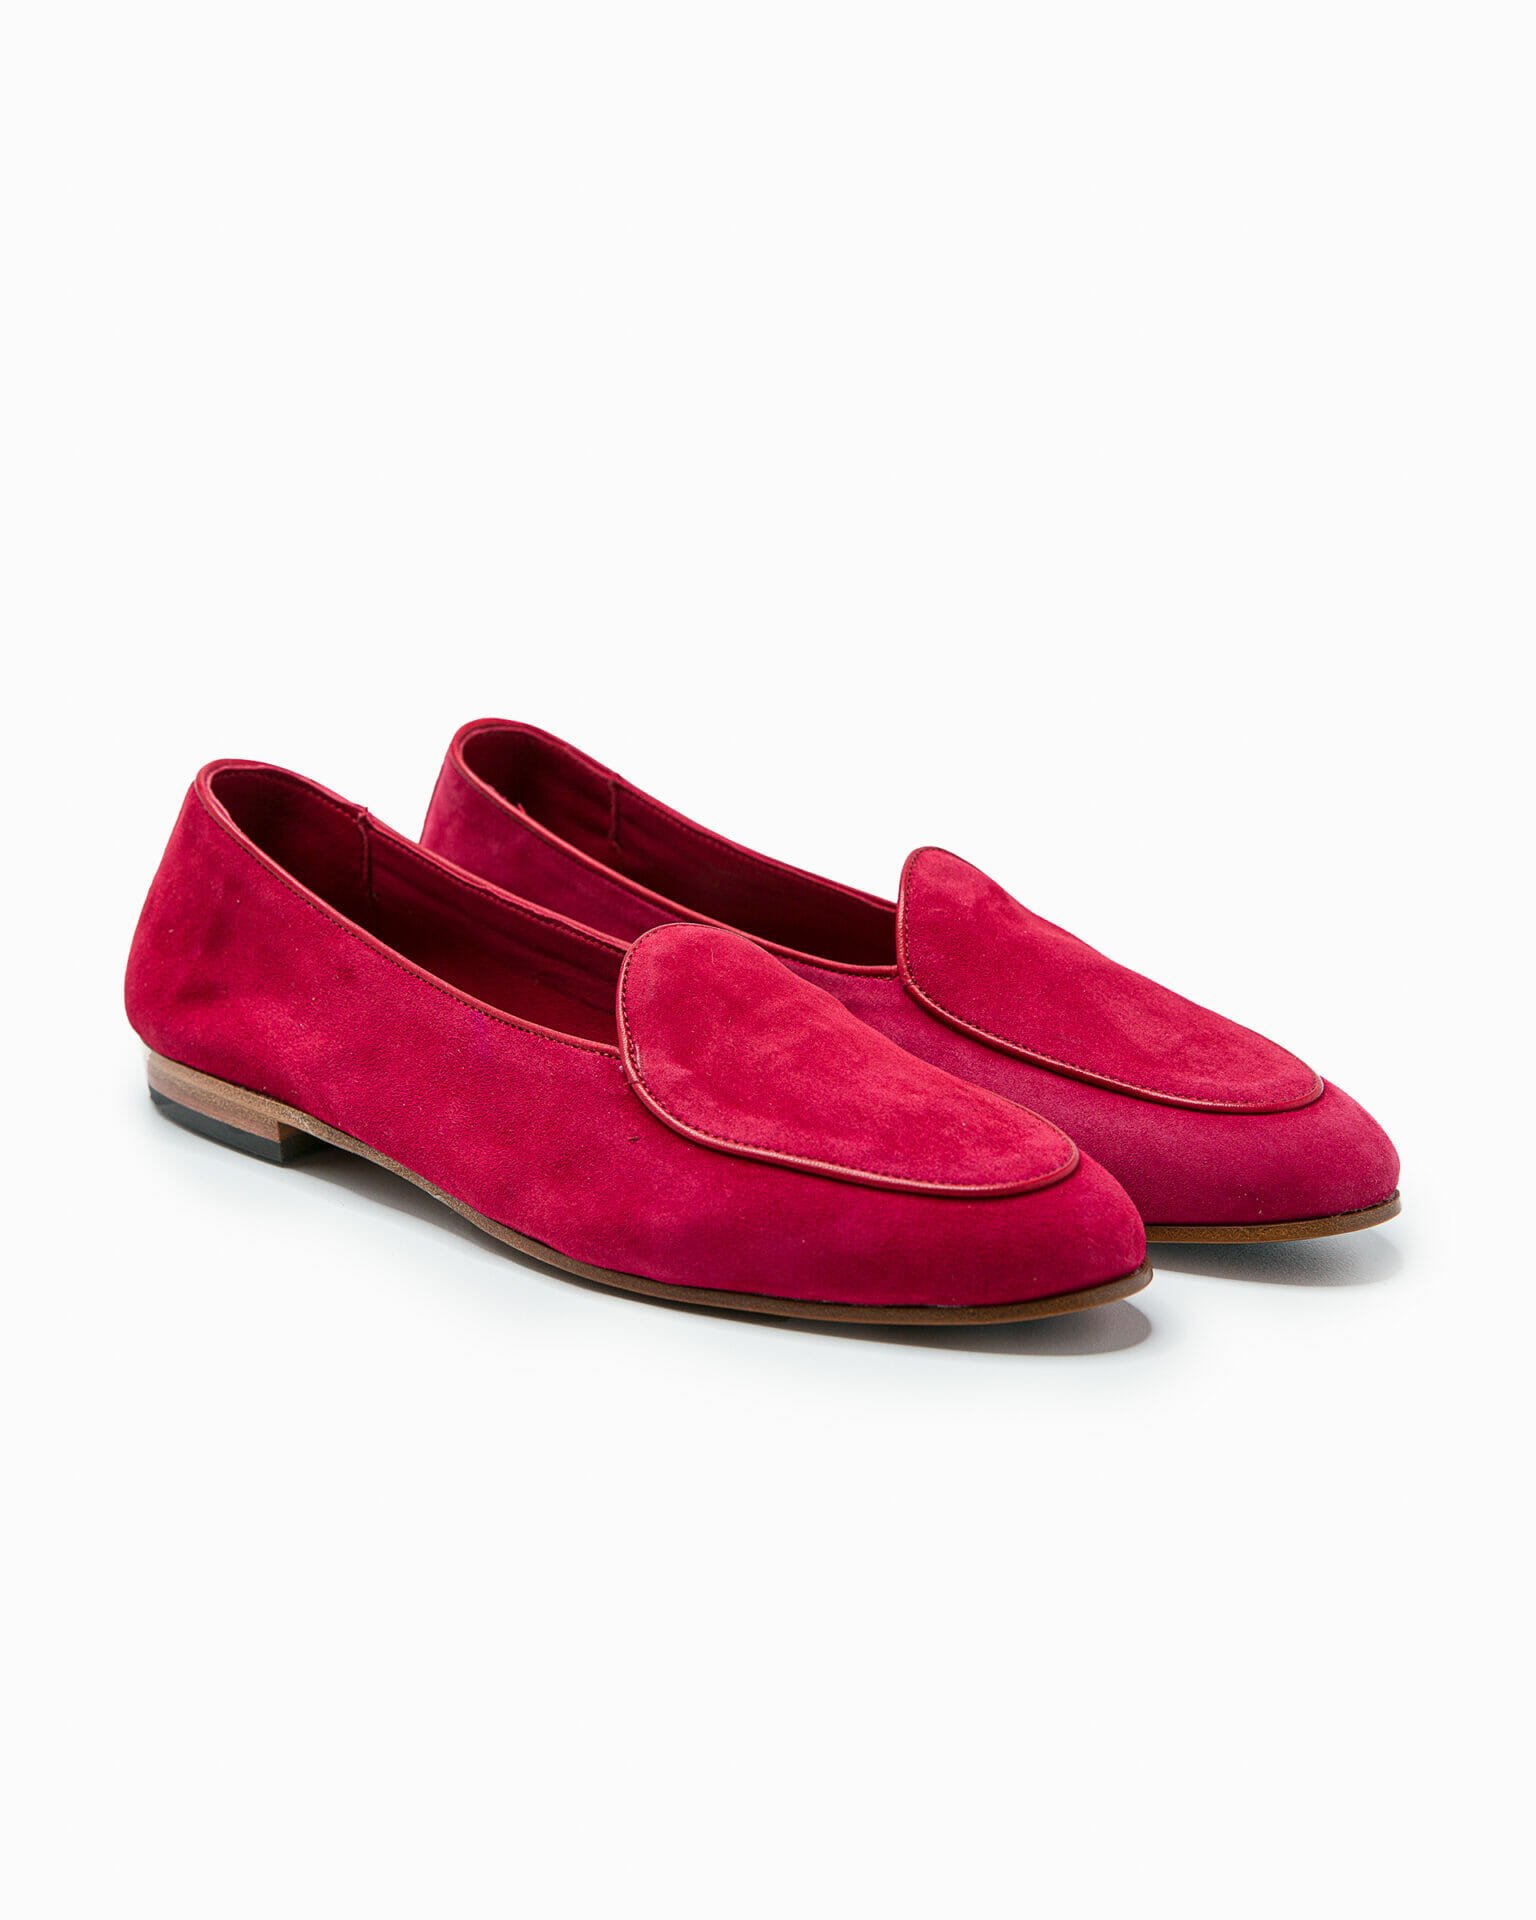 BELGIAN-D LS RUBY RED SUEDE LOAFERS FOR WOMEN - Andrea Ventura Firenze